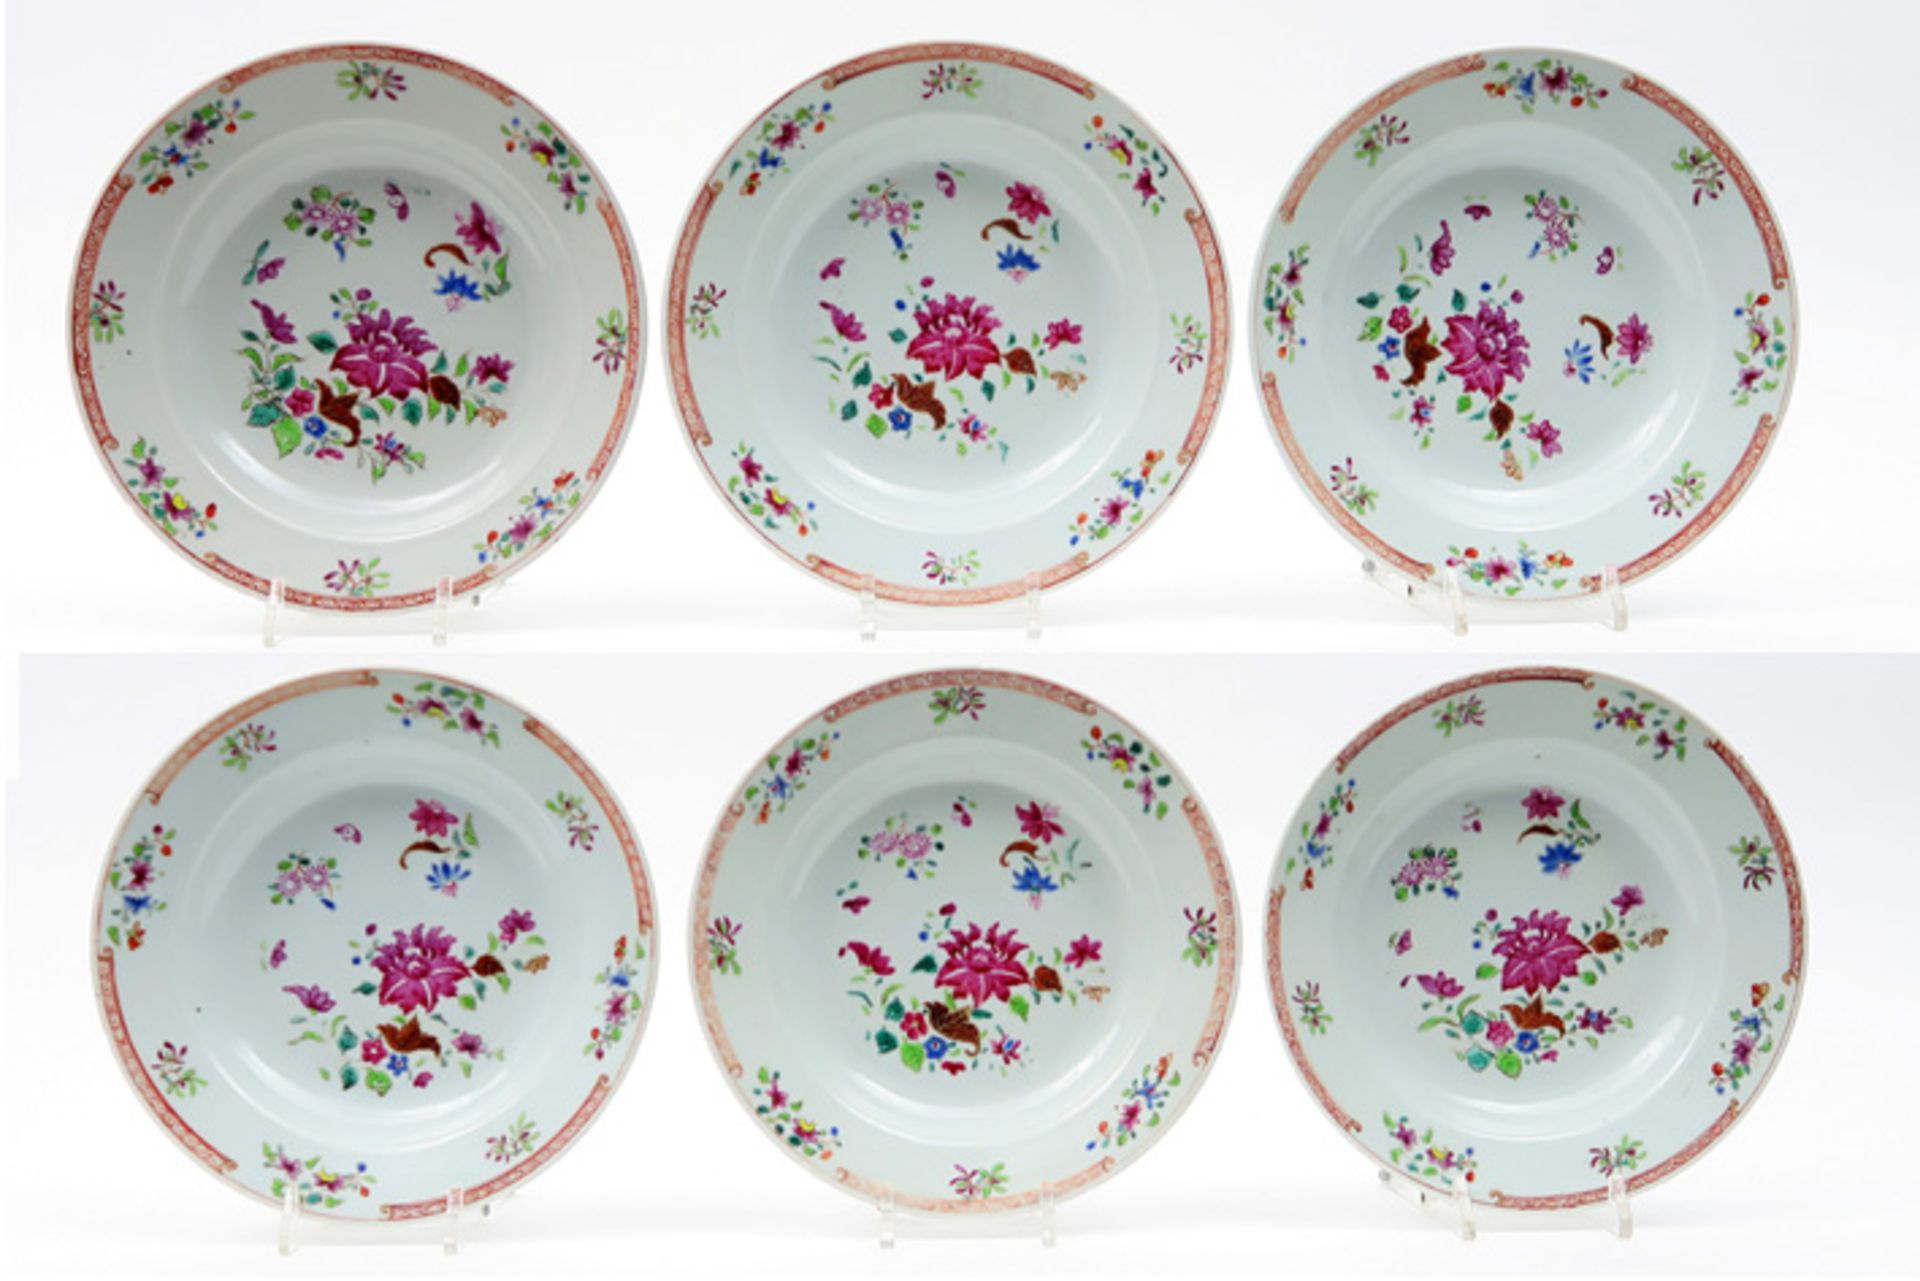 series of six 18th Cent. Chinese plates in porcelain with Famille Rose flowers decor Reeks van zes